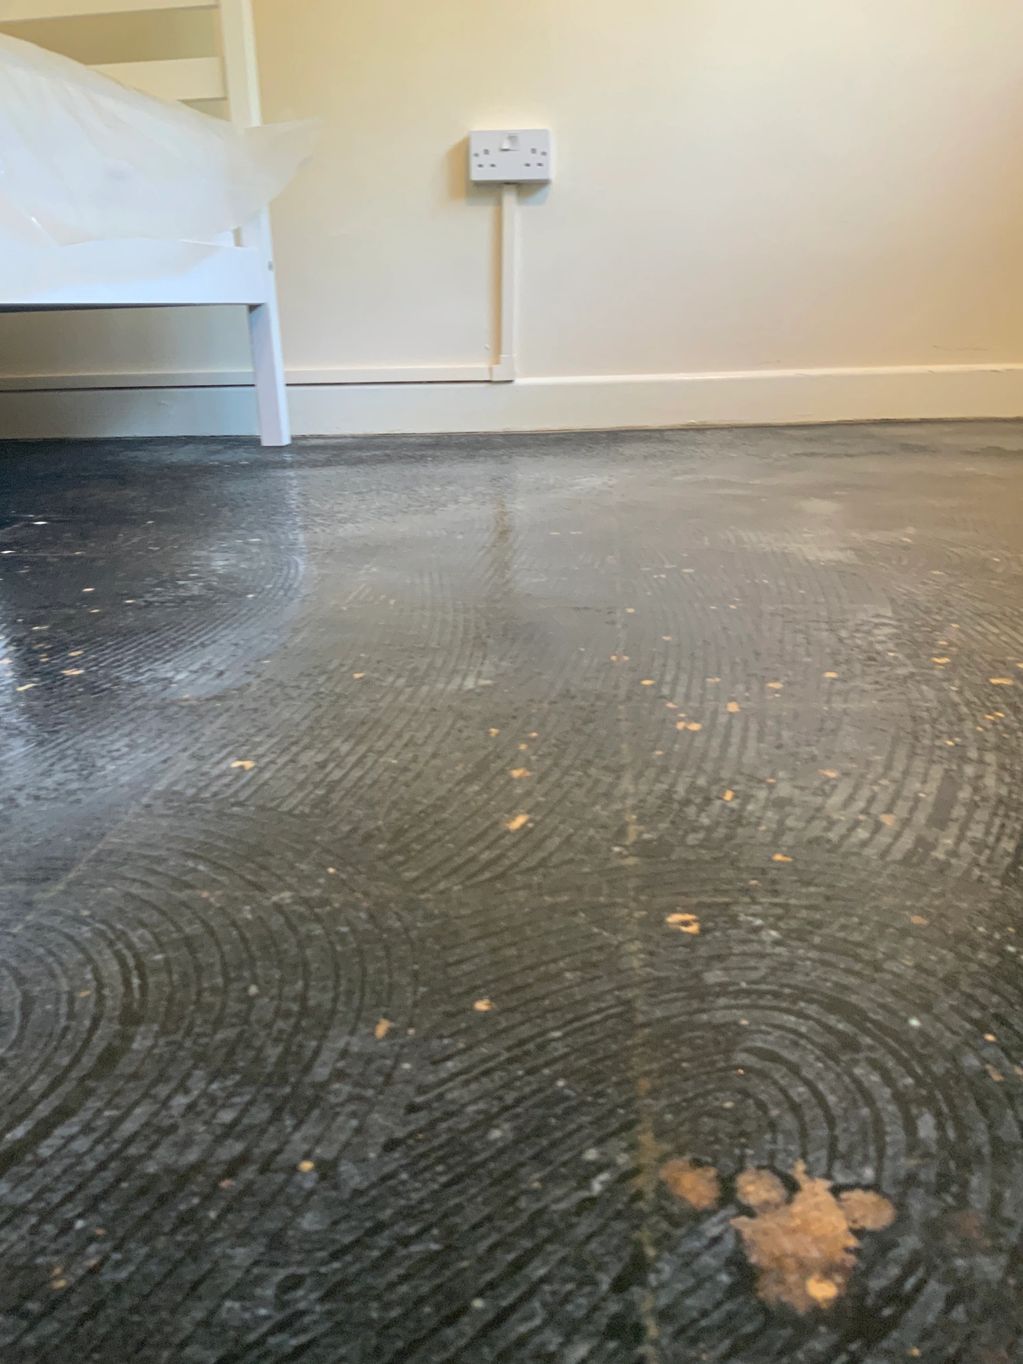 Picture detailing the floor being sealed with PVA glue following the removal of asbestos floor tiles